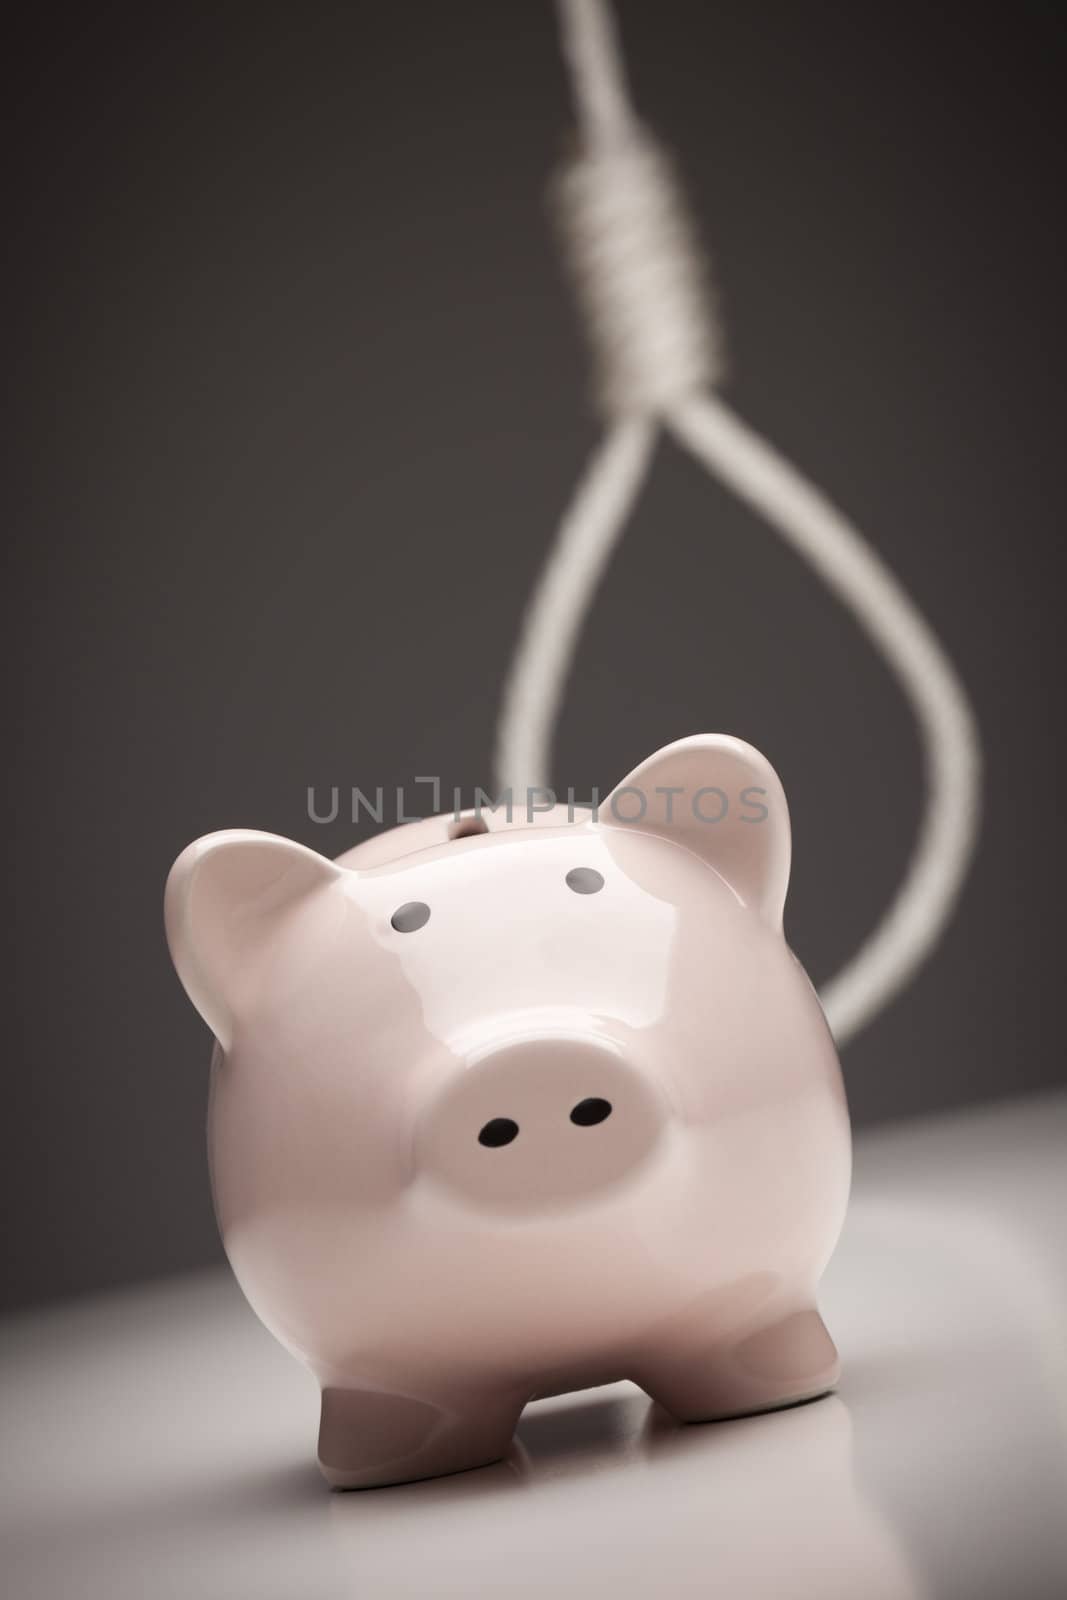 Piggy Bank with Hangman's Noose in Background by Feverpitched